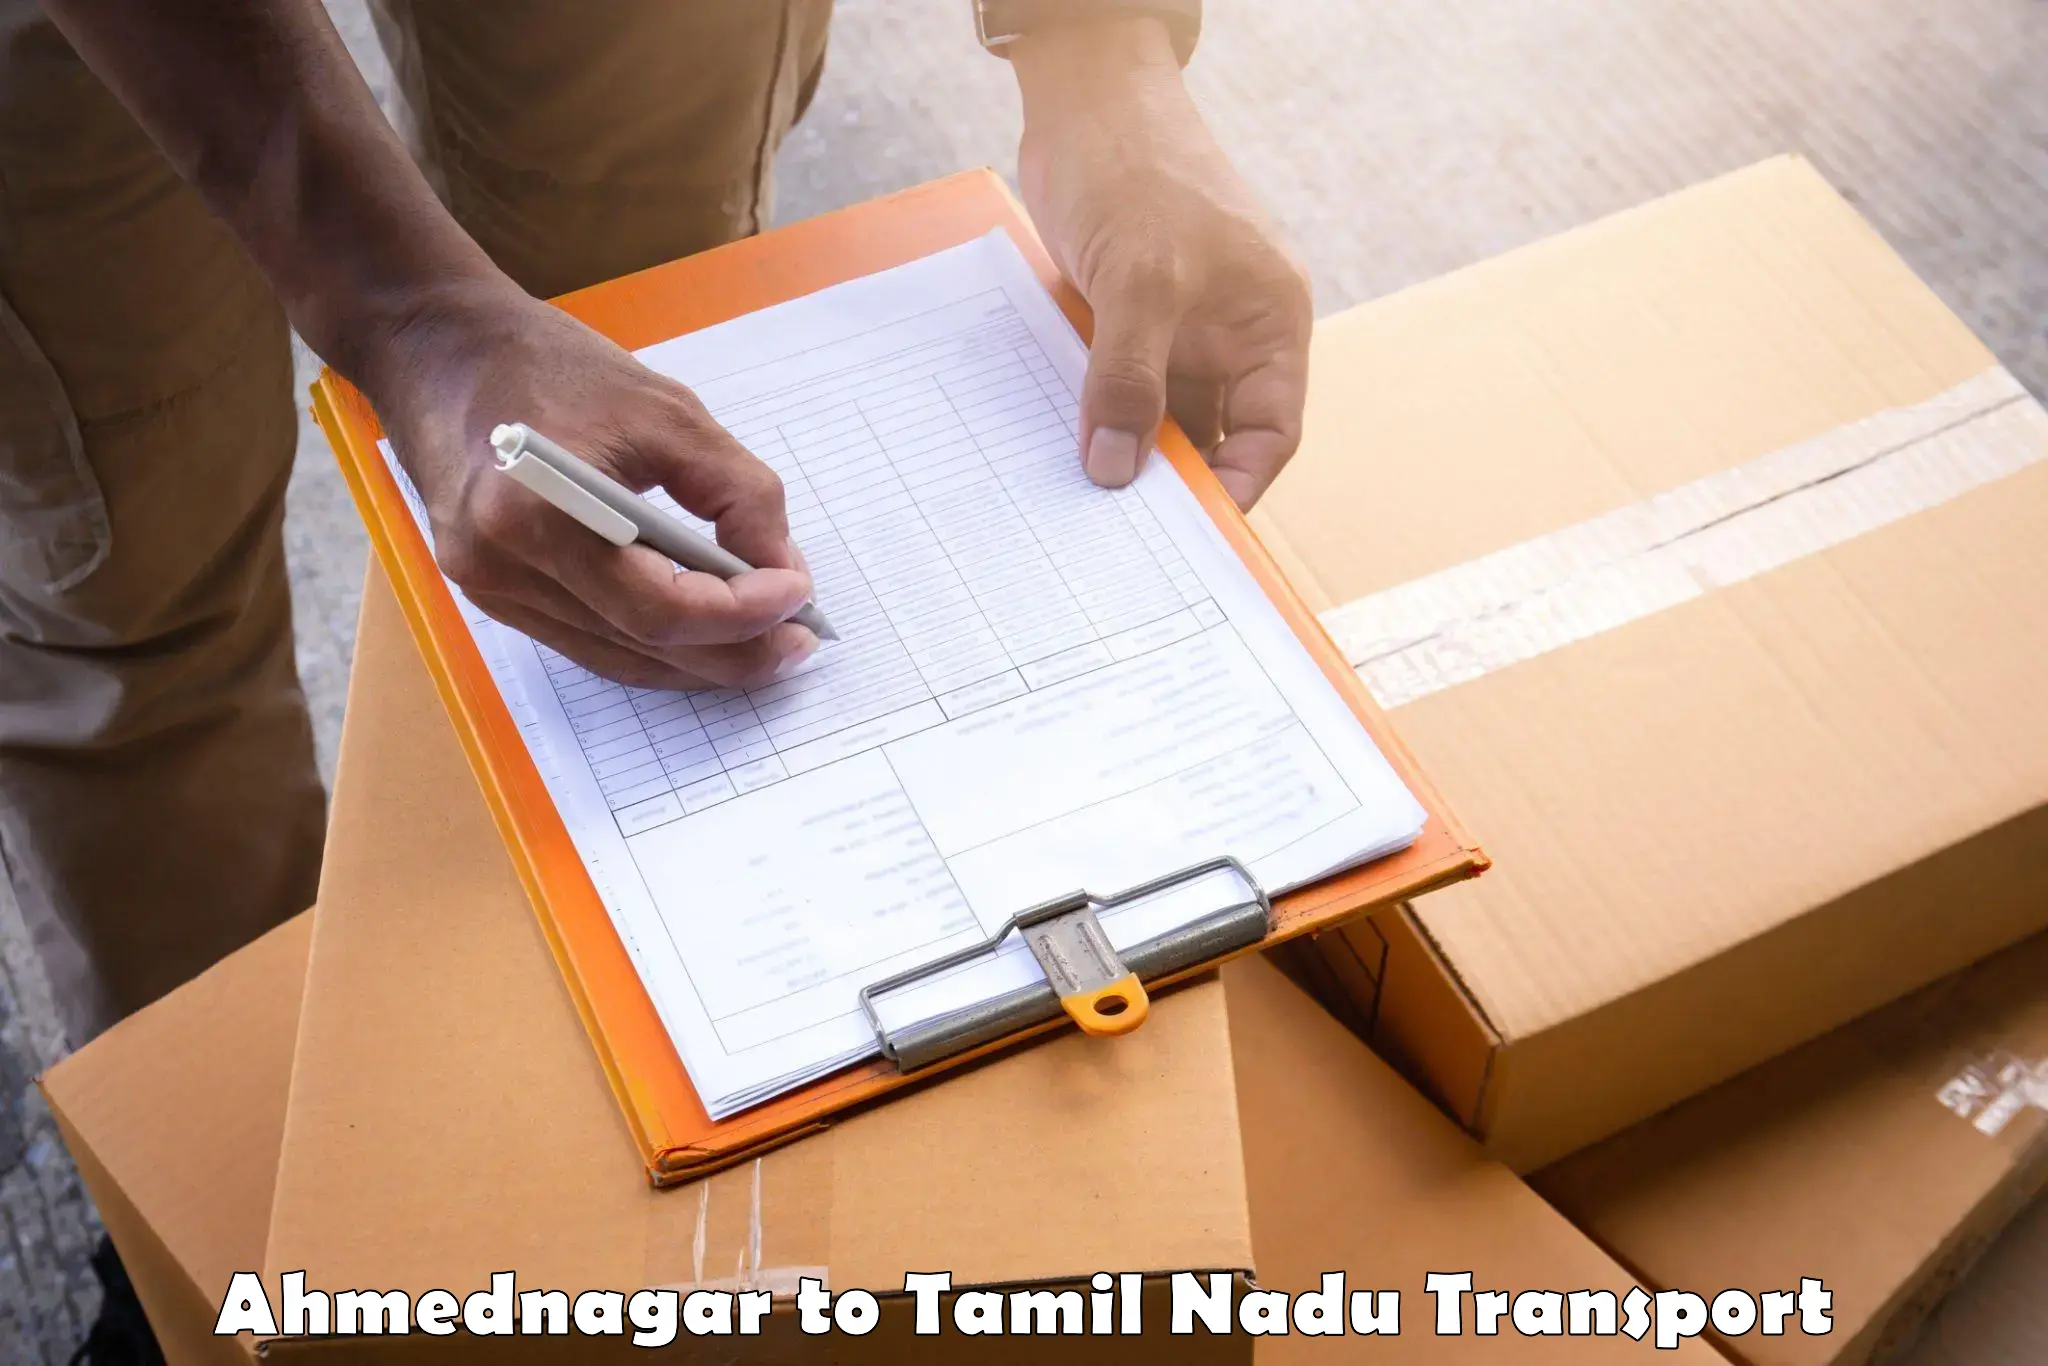 Inland transportation services Ahmednagar to Vellore Institute of Technology